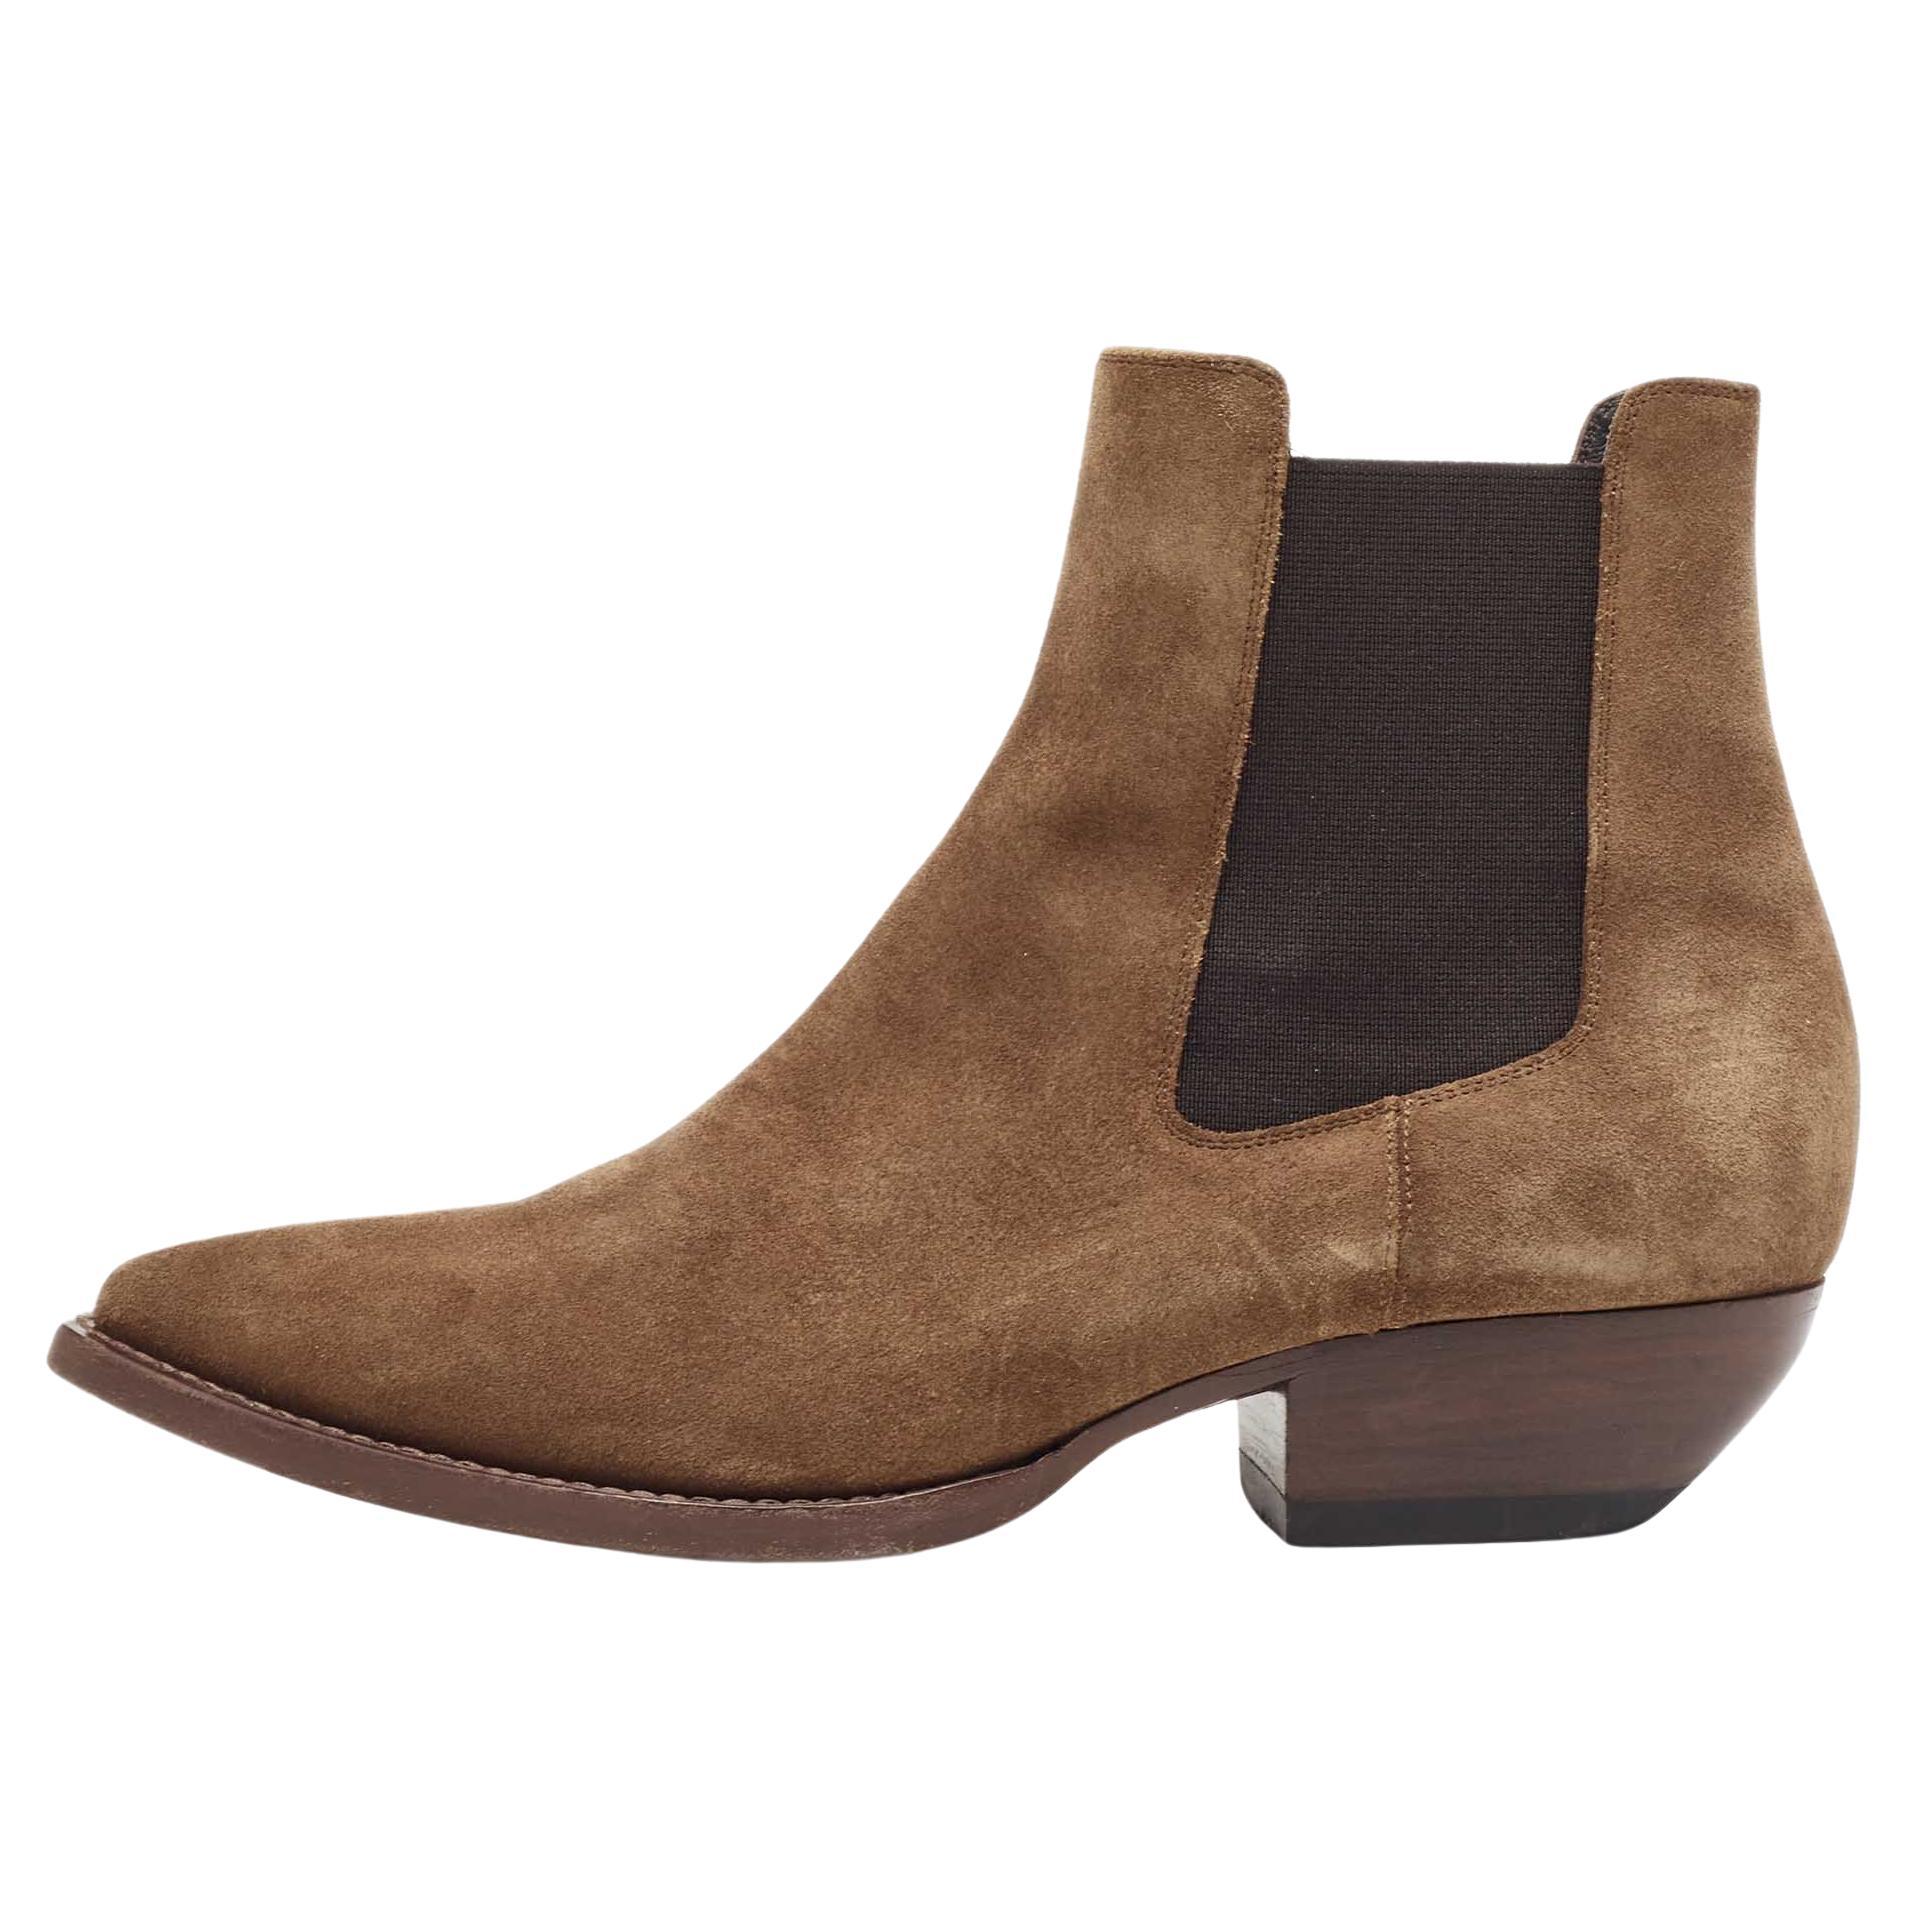 Saint Laurent Brown Suede Theo Chelsea Boots Size 40